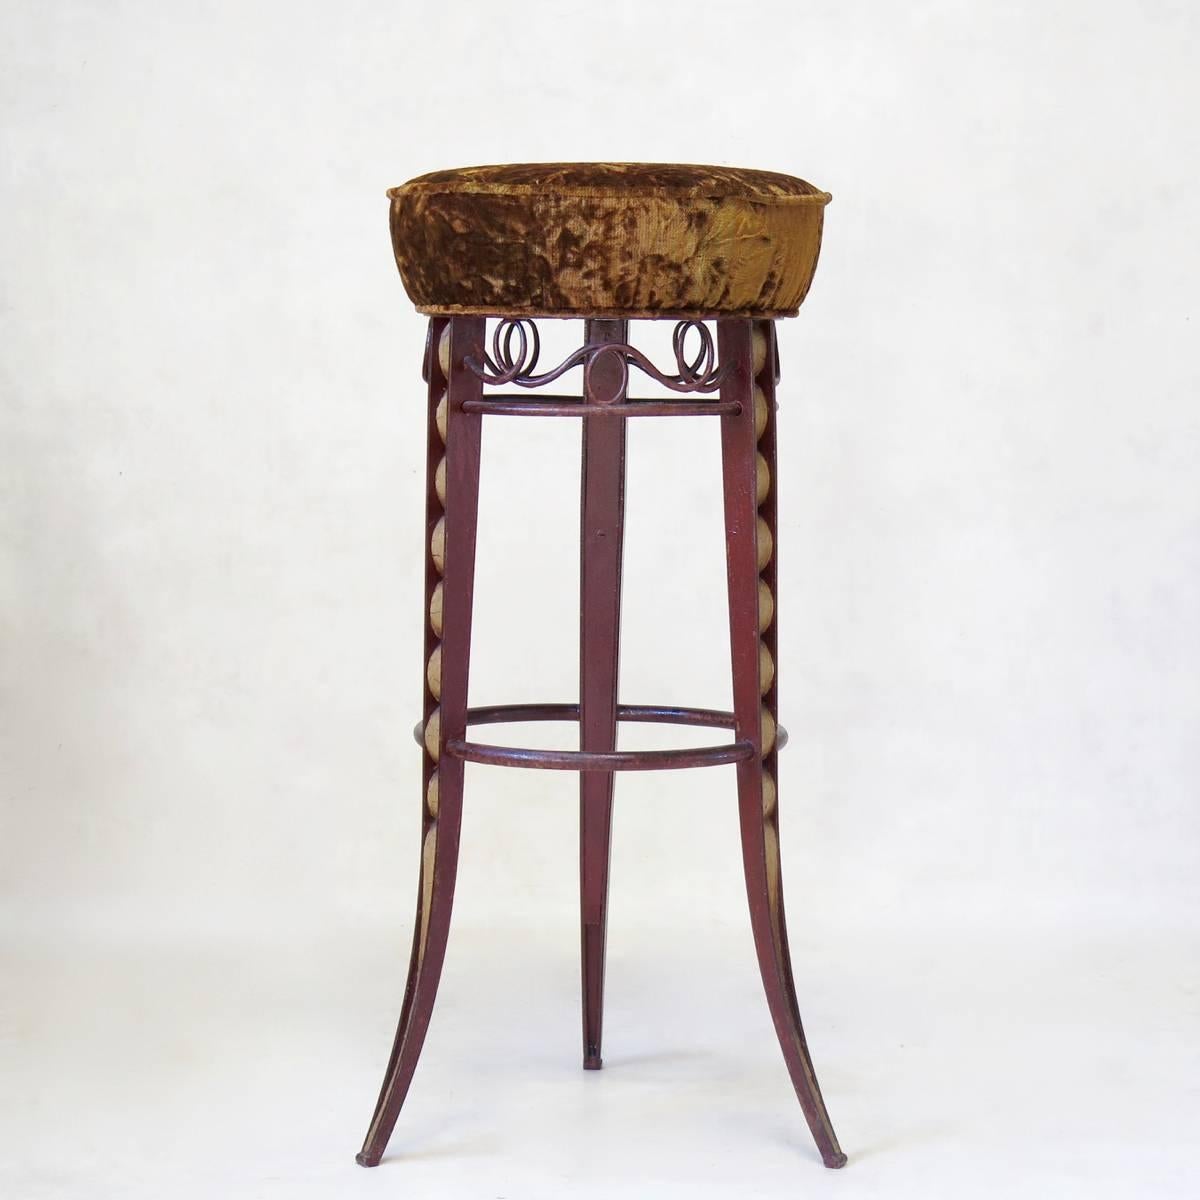 Very lovely and rare pair of wrought iron stools with velvet seats, raised on three splayed and tapering legs. The ironwork on the legs is particularly unusual and wonderful, as is the original paint -- dark red, with craqueled off-white.